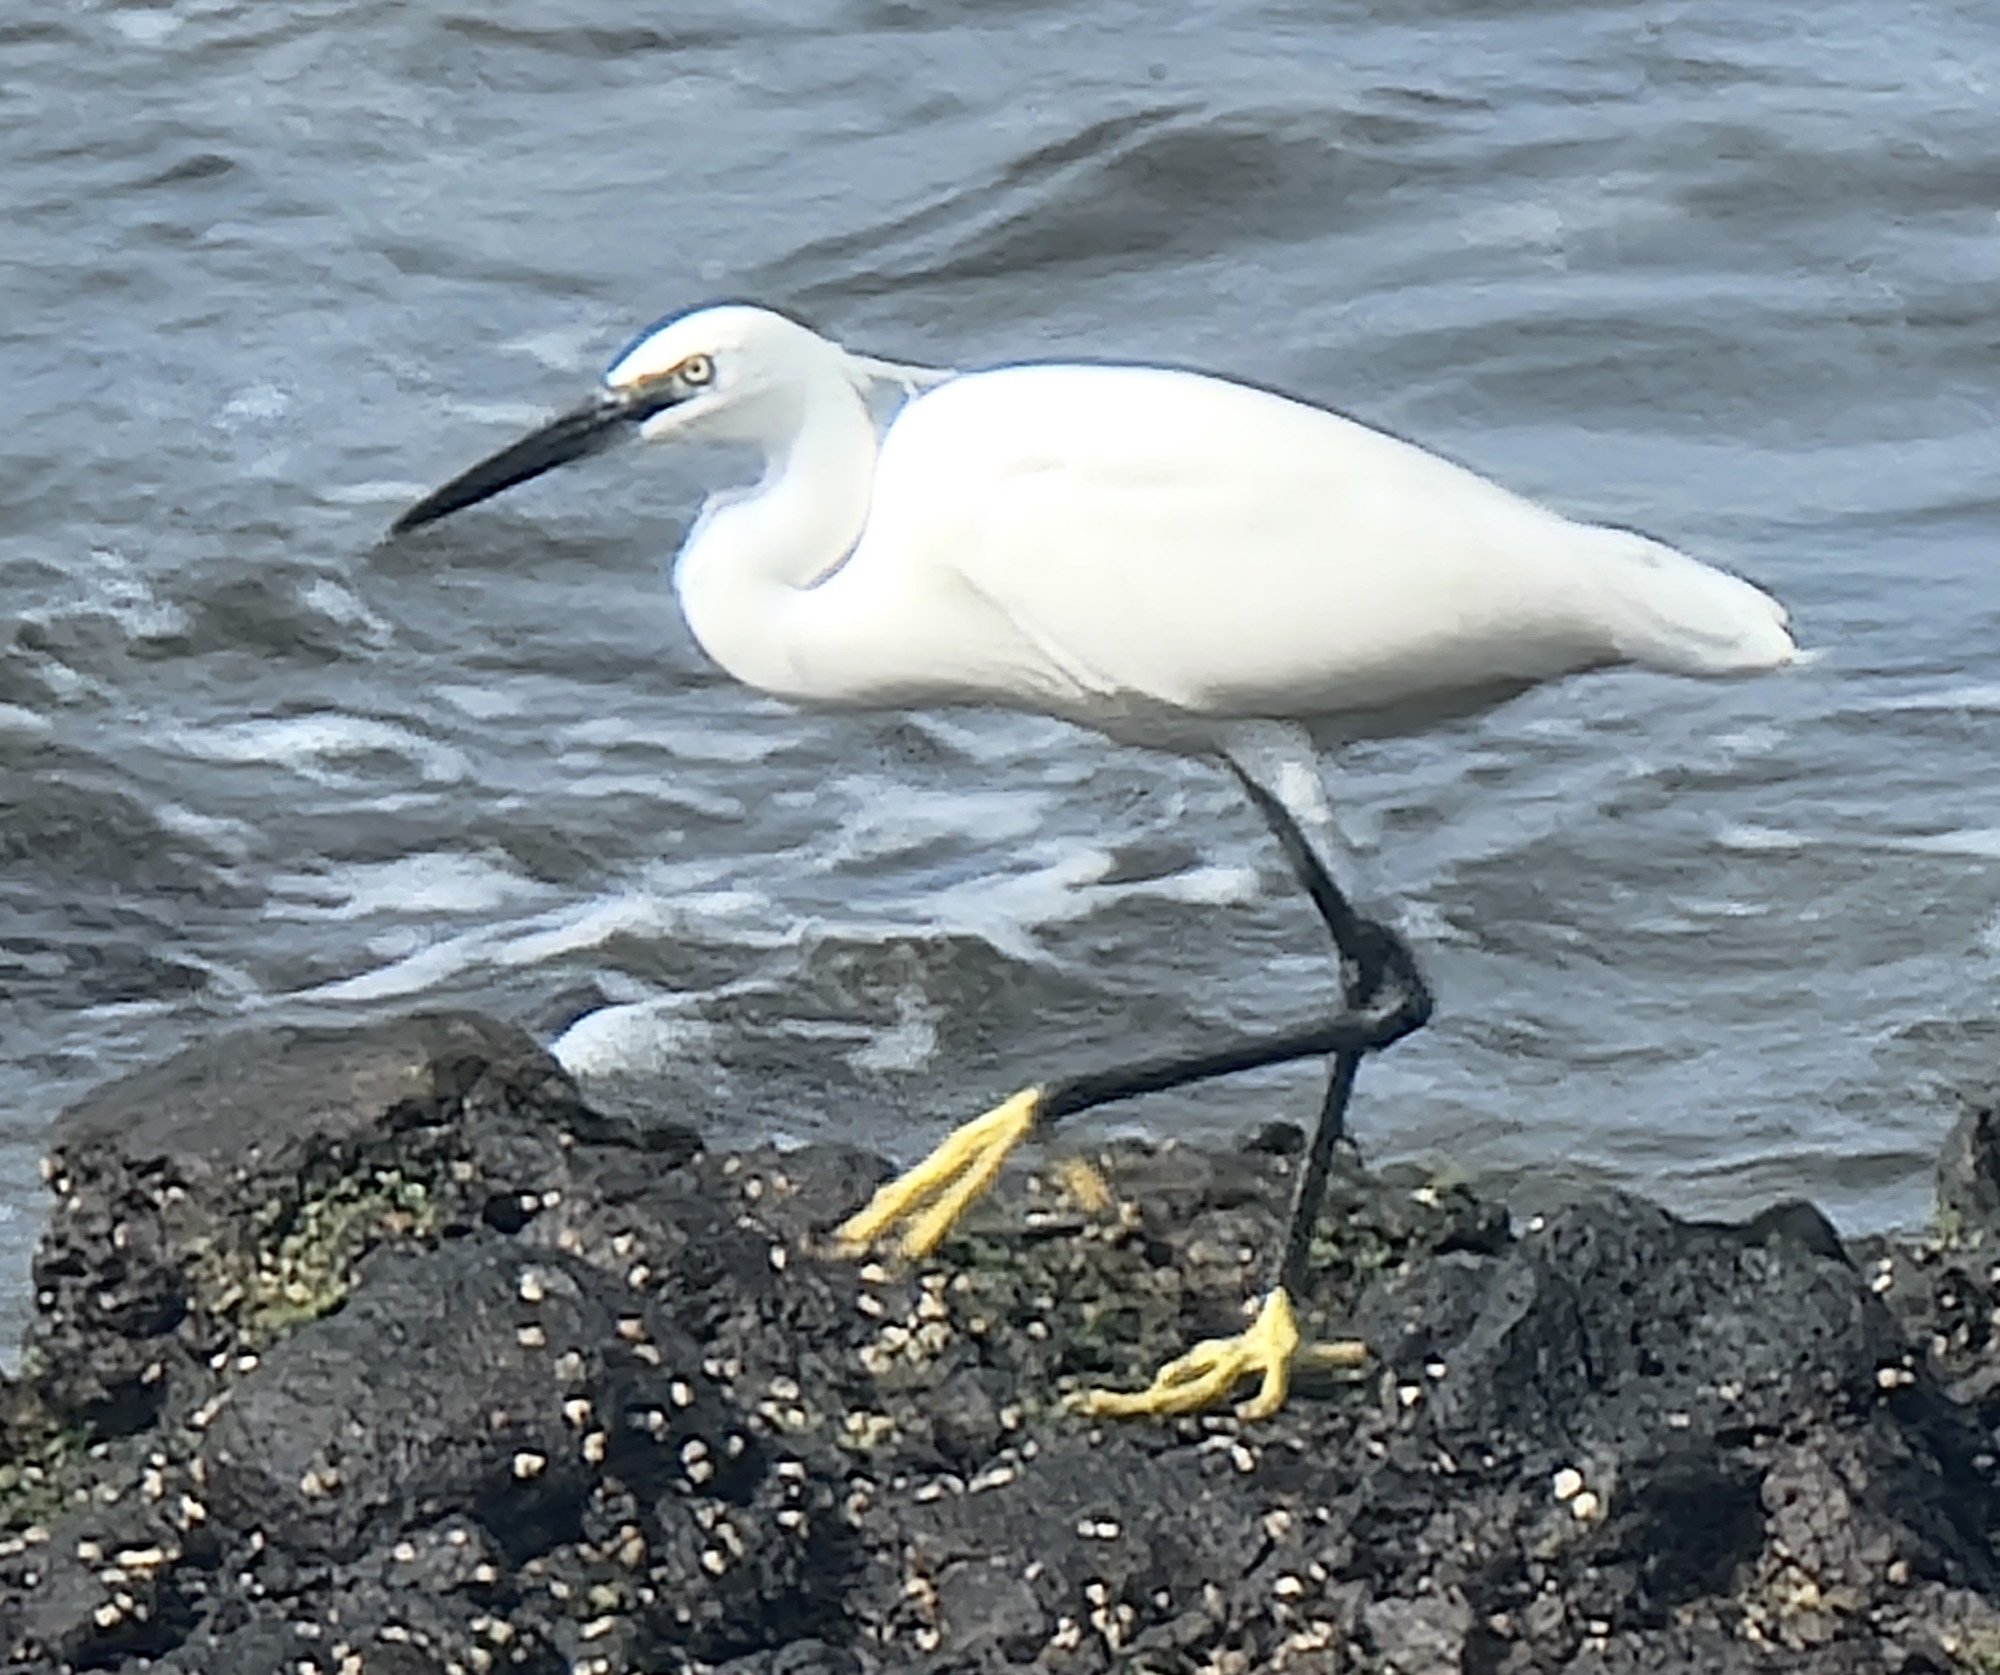 Los Christianos is the tourist epicenter of Tenerife. Here's a white egret to add to my bird collection.